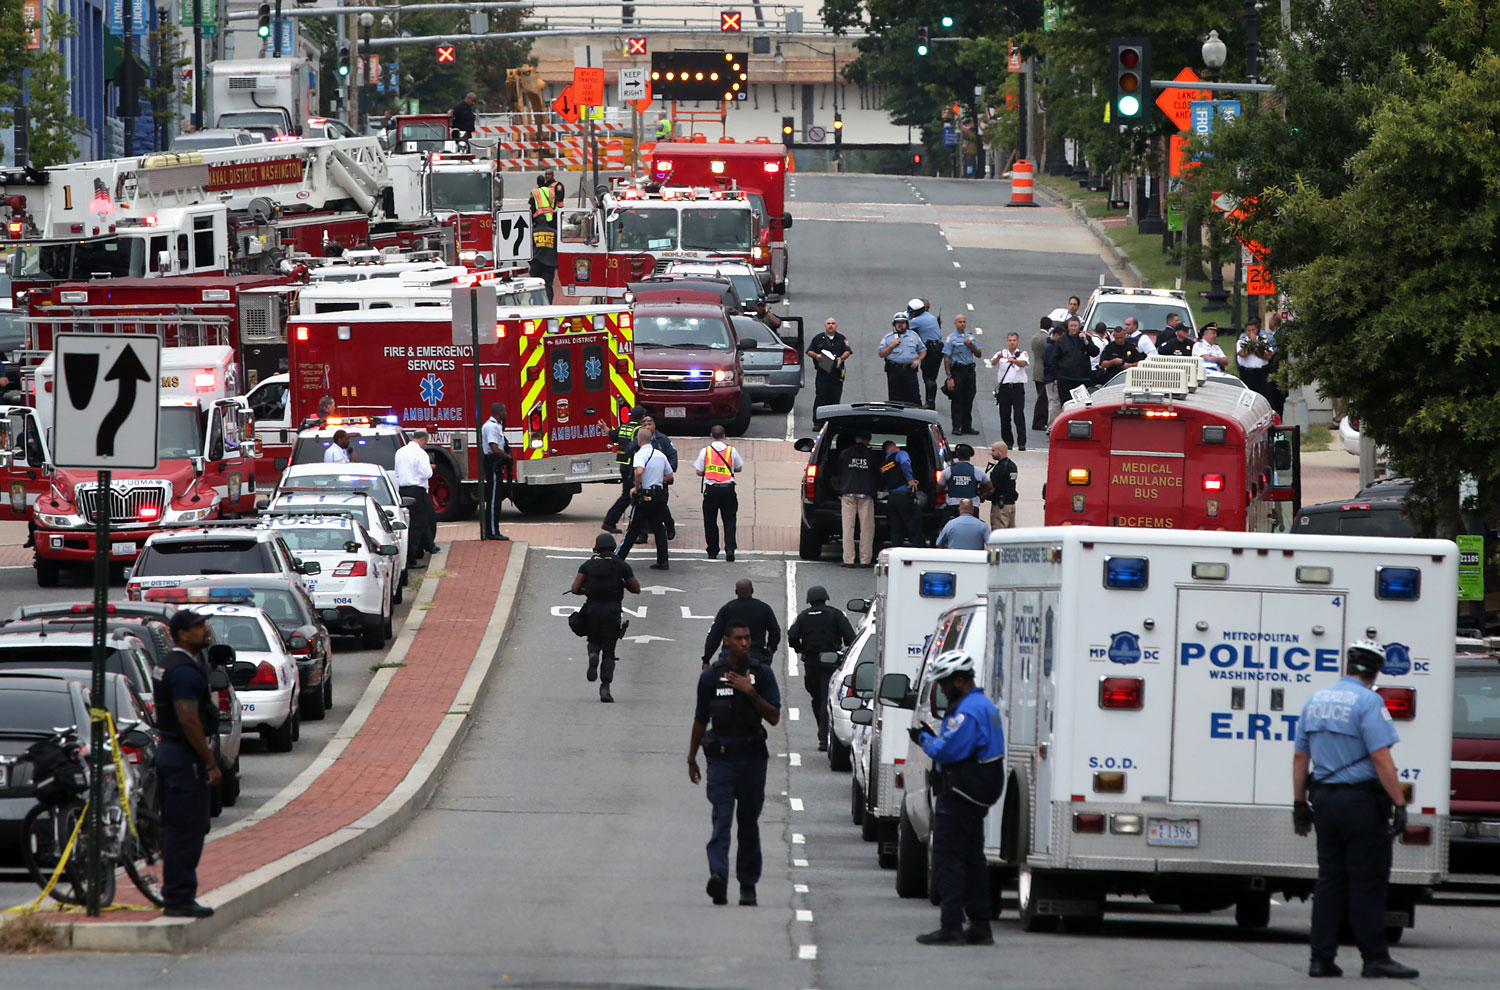 Emergency vehicles and law enforcement personnel respond to a shooting at an entrance to the Washington Navy Yard, Sept. 16, 2013 in Washington, DC.